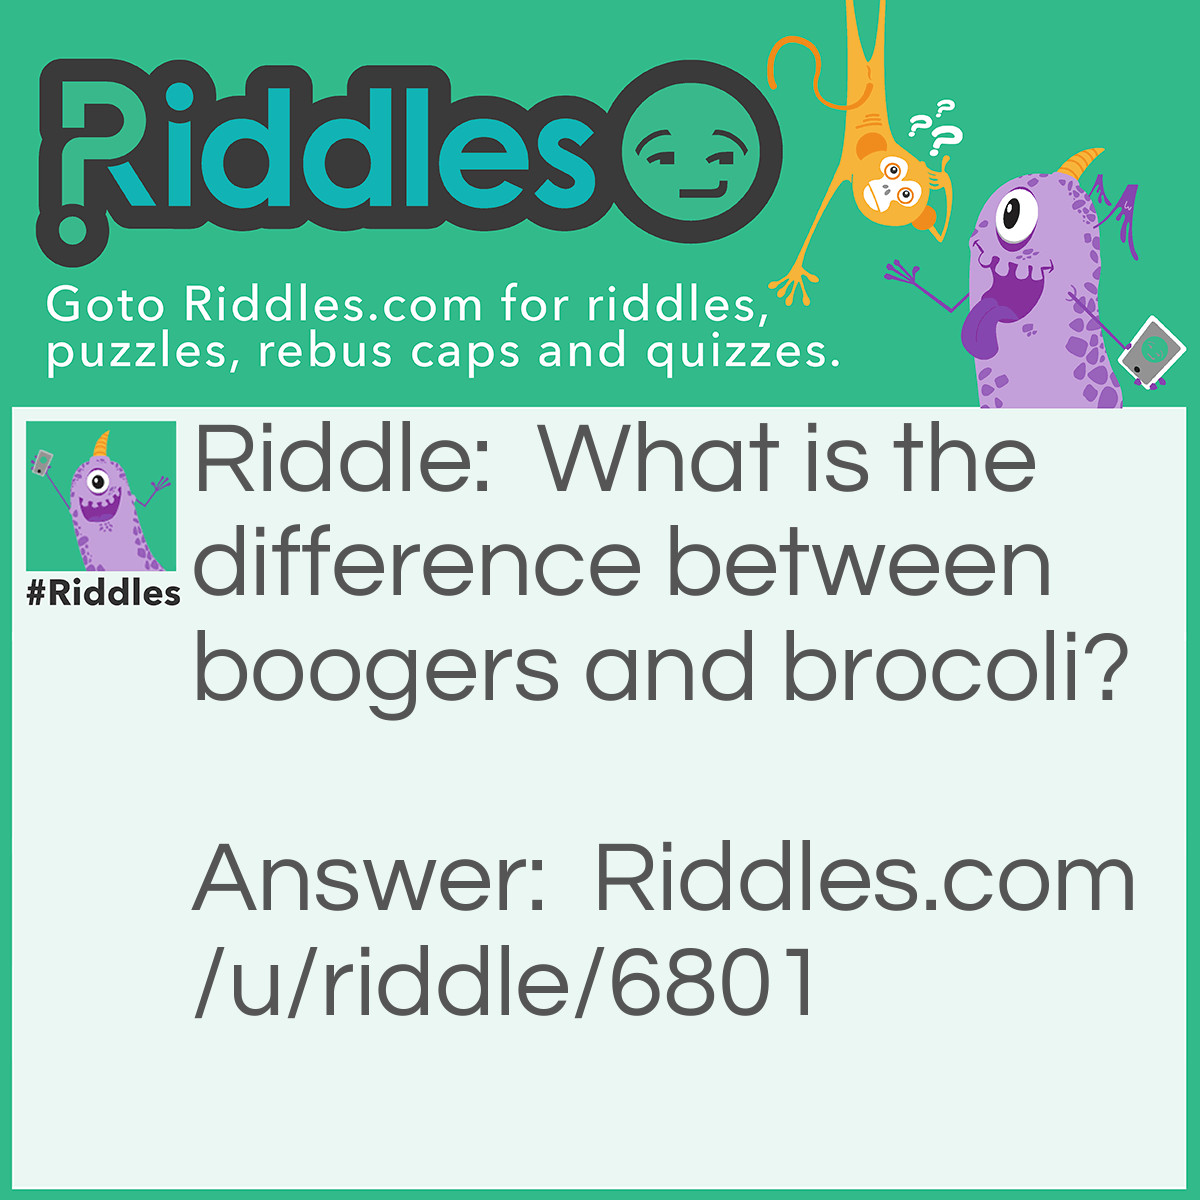 Riddle: What is the difference between boogers and brocoli? Answer: Kids won't eat the broccoli.